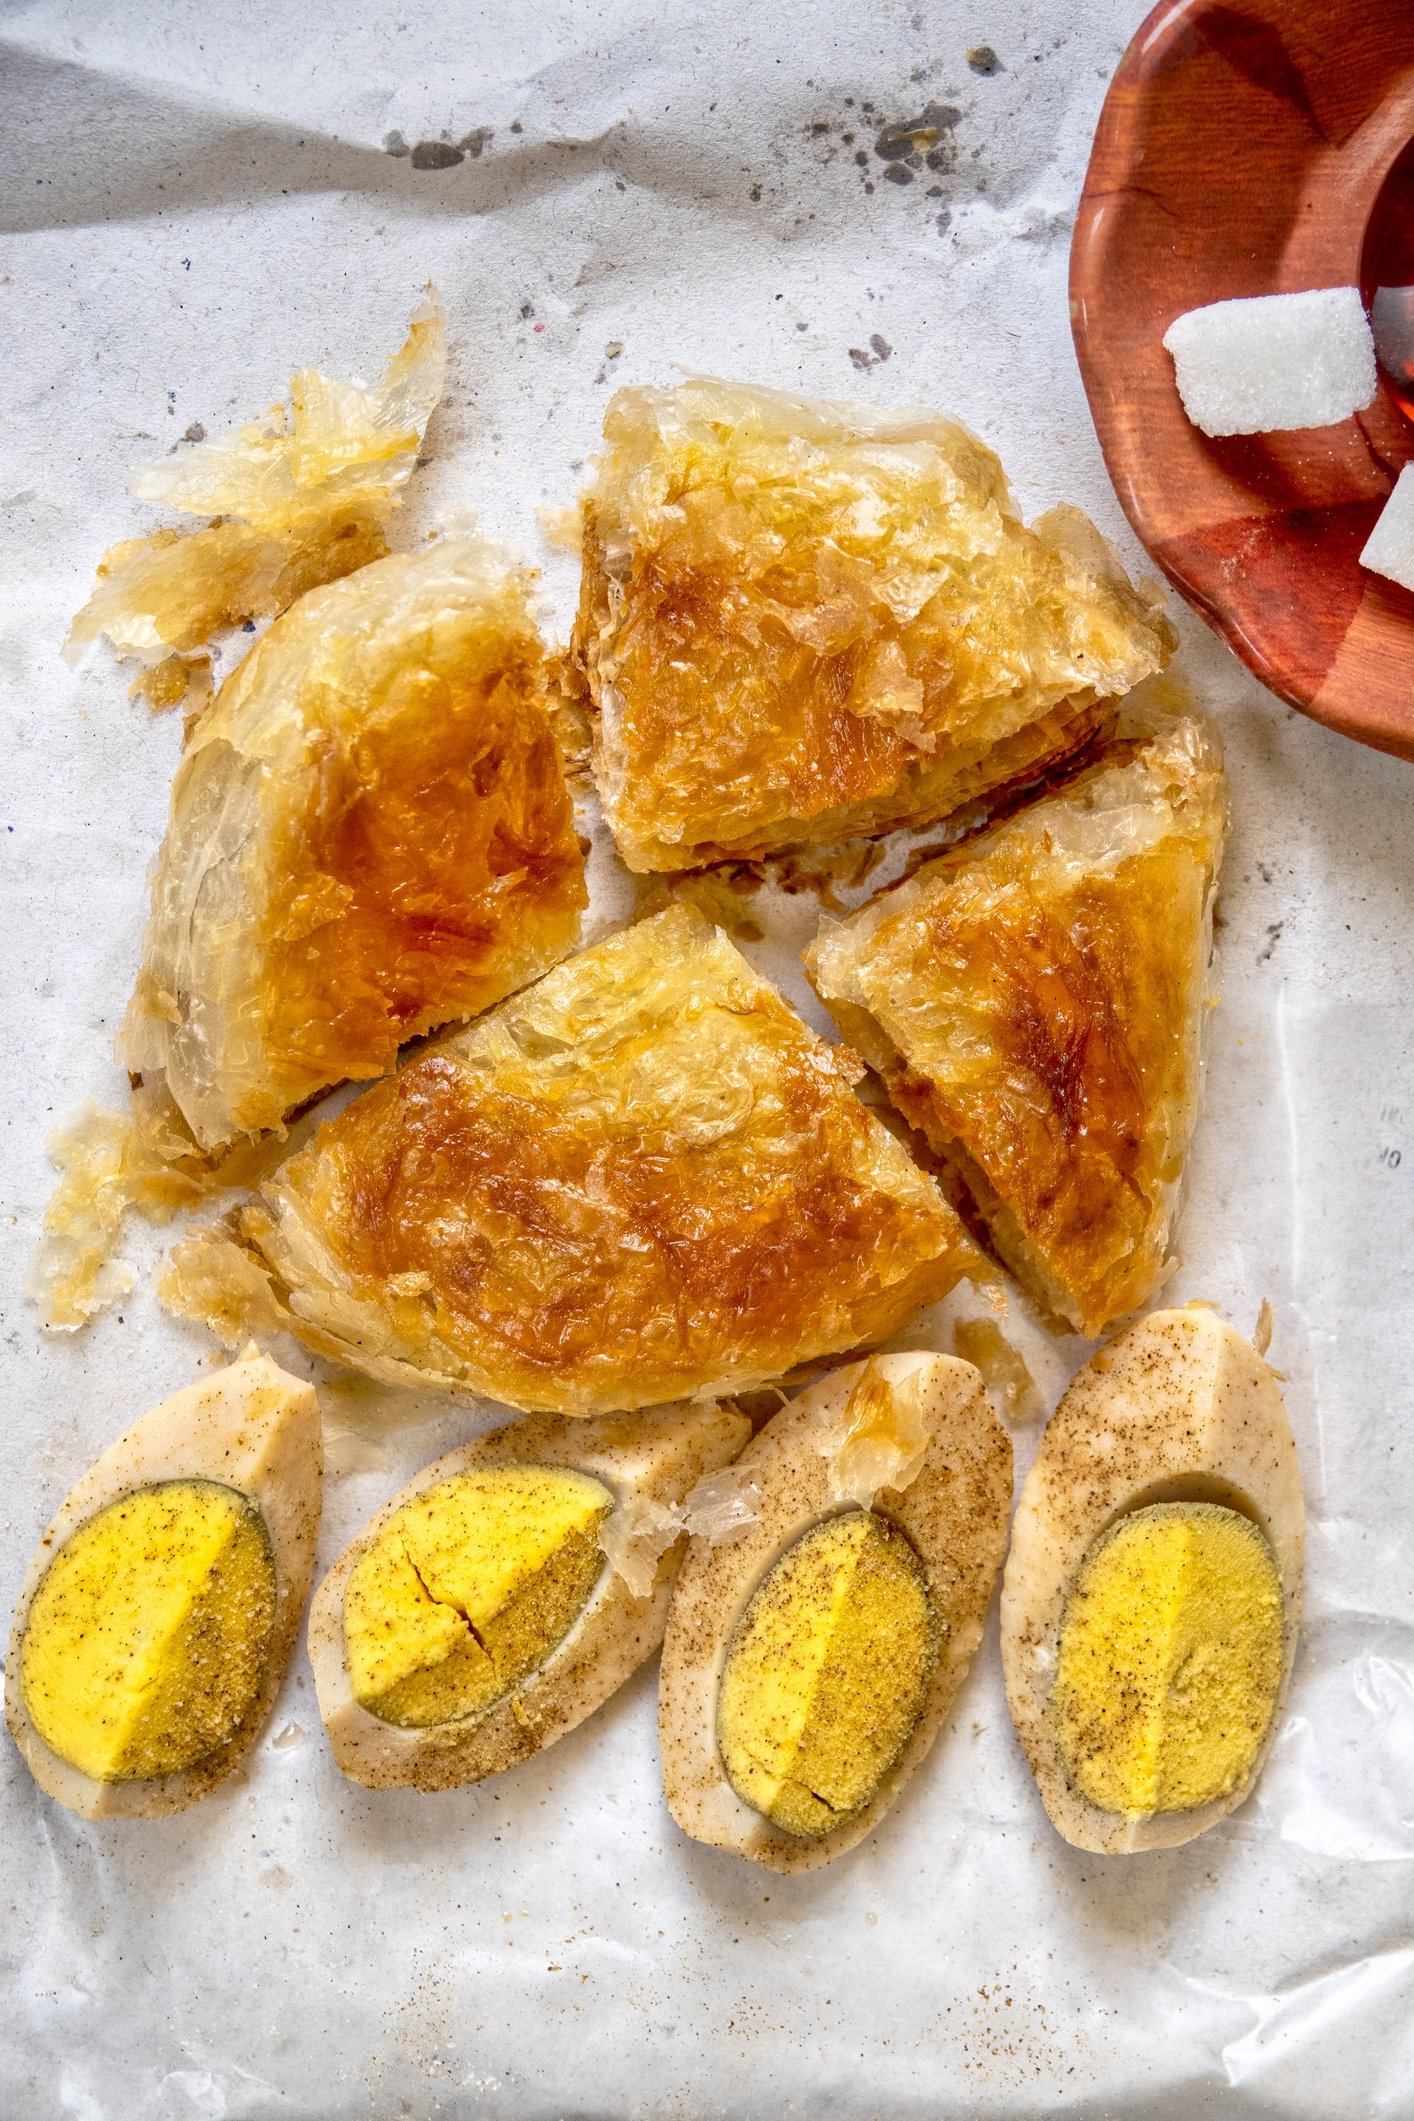 Boyoz is a Turkish pastry associated with Izmir and usually consumed with a side of tea and hard-boiled eggs. (iStock Photo)